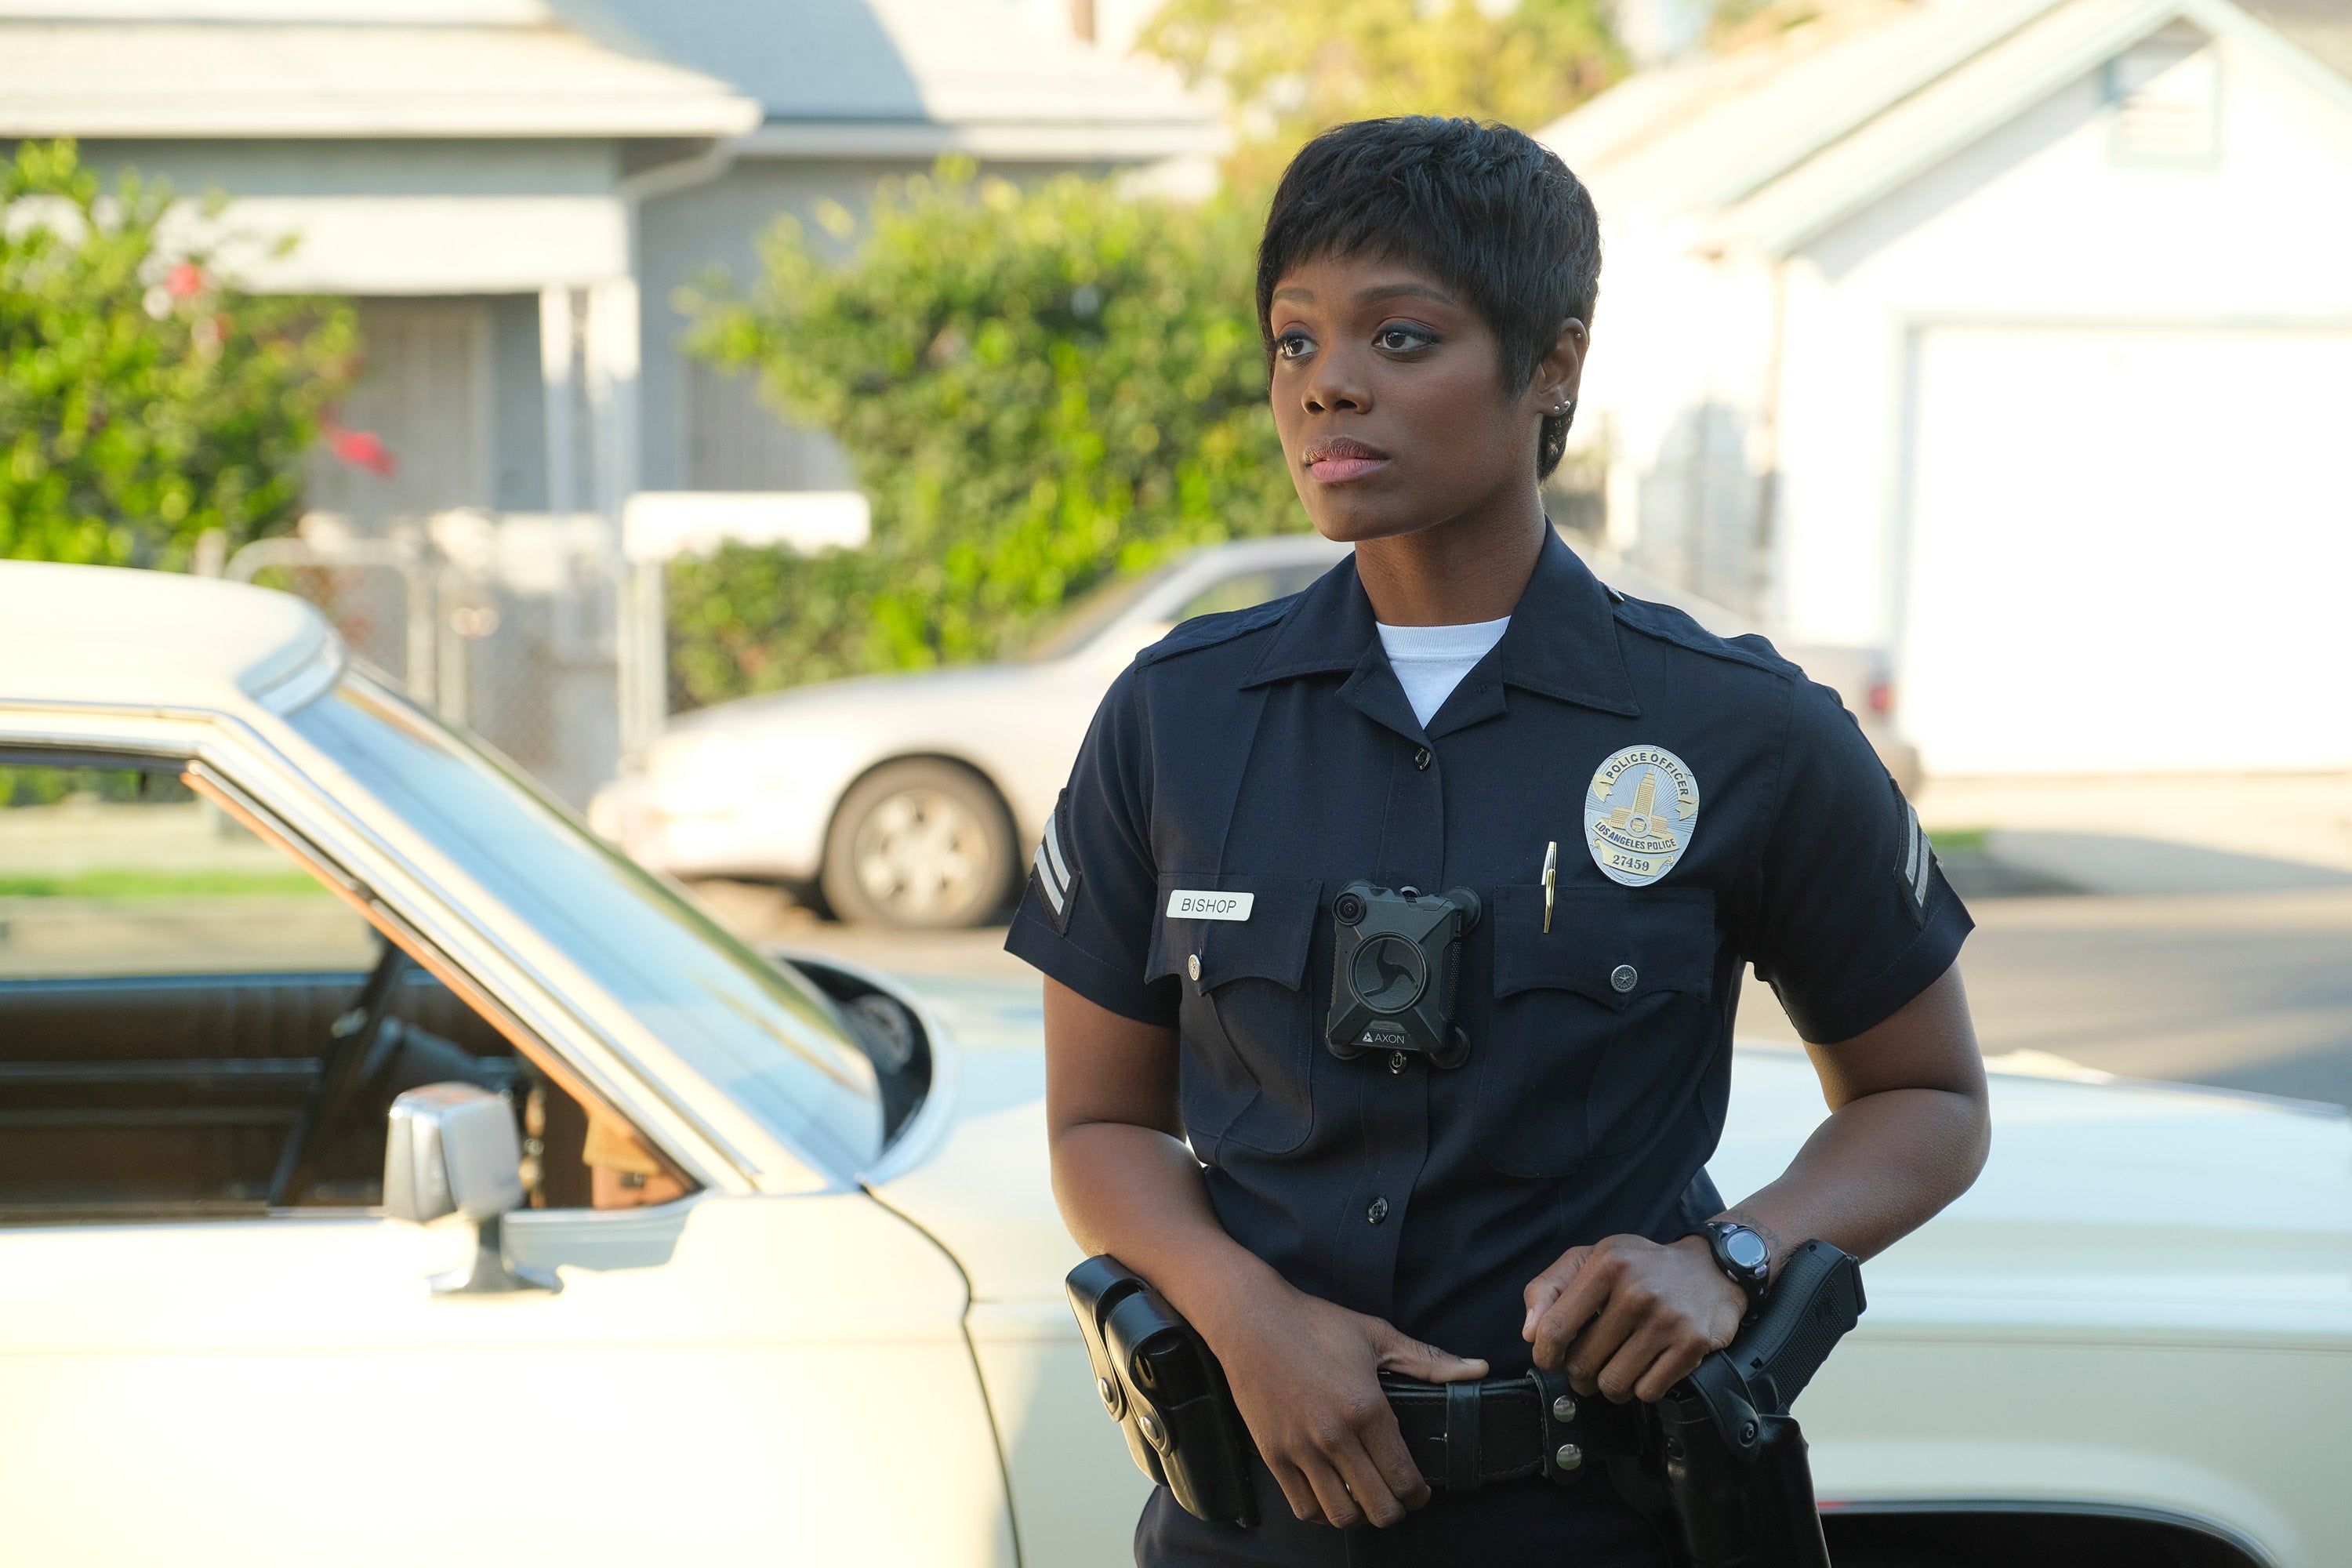 ‘The Rookie’ Actress Afton Williamson Quits Show After Alleging Racial Discrimination, Sexual Harassment